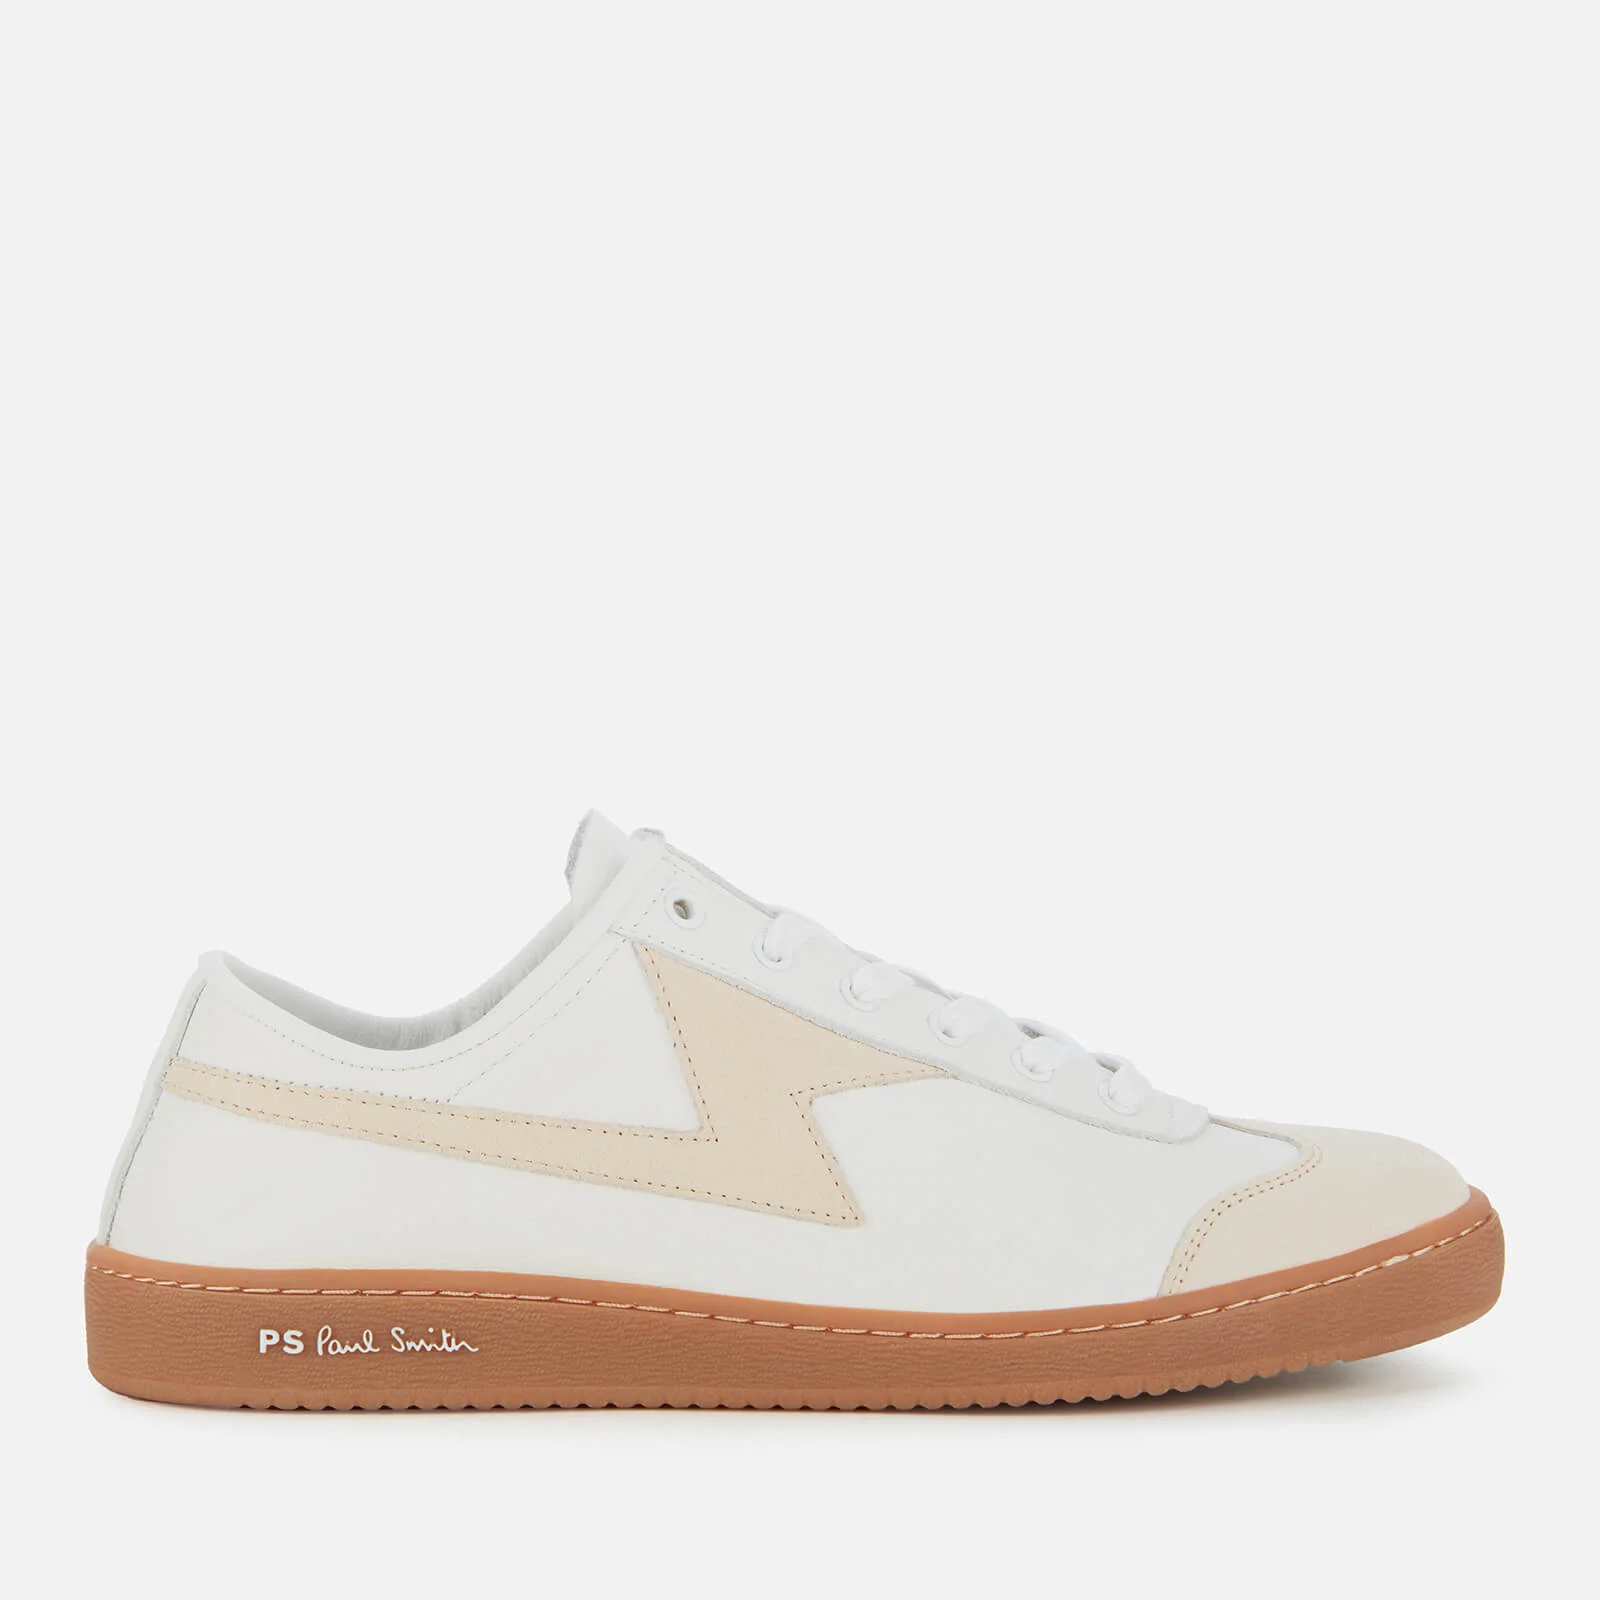 PS Paul Smith Men's Ziggy Leather Cupsole Trainers - White Image 1